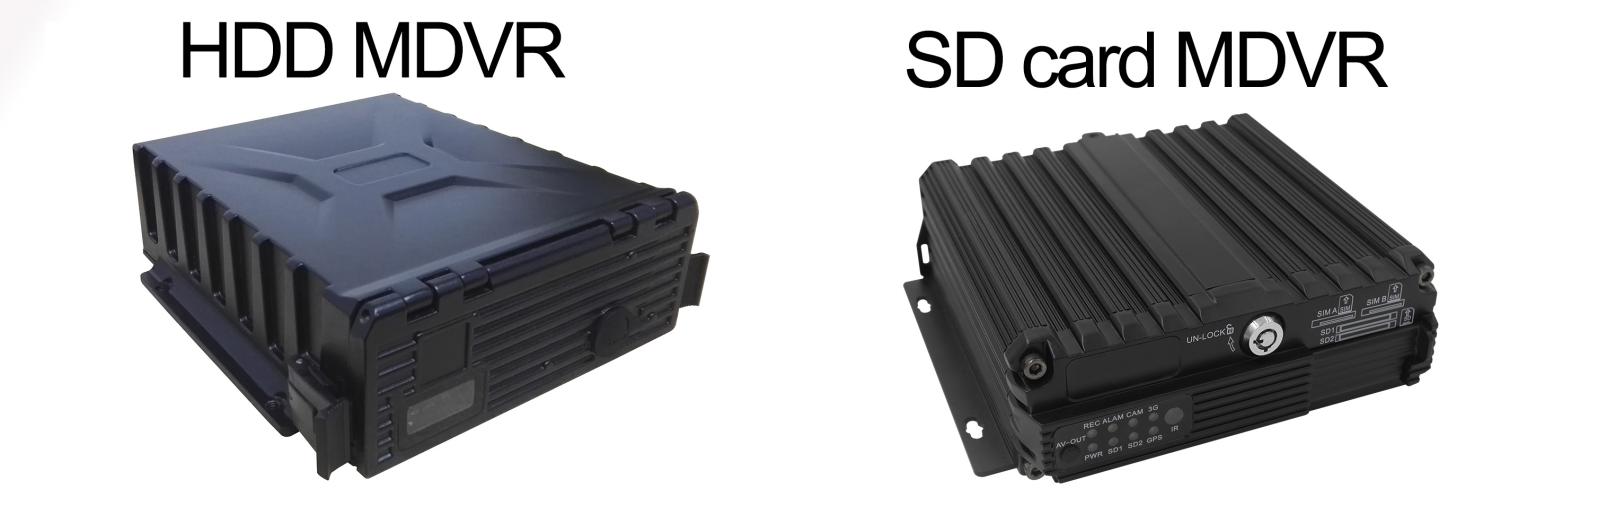 The differences between SD card and HDD in terms of MDVR applications Picture7